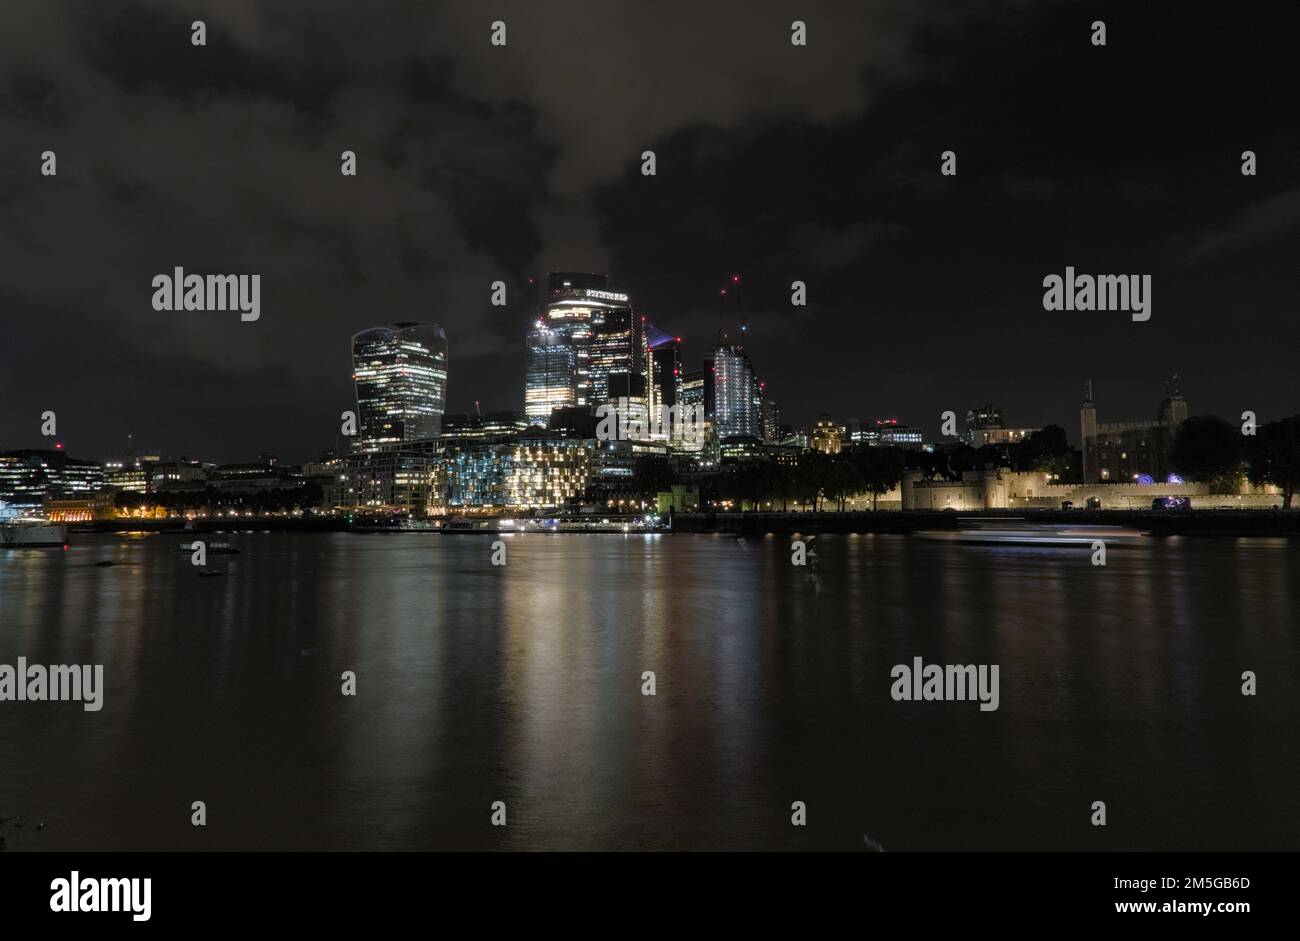 The night view of the city along River Times in London with the reflection in the water. Stock Photo